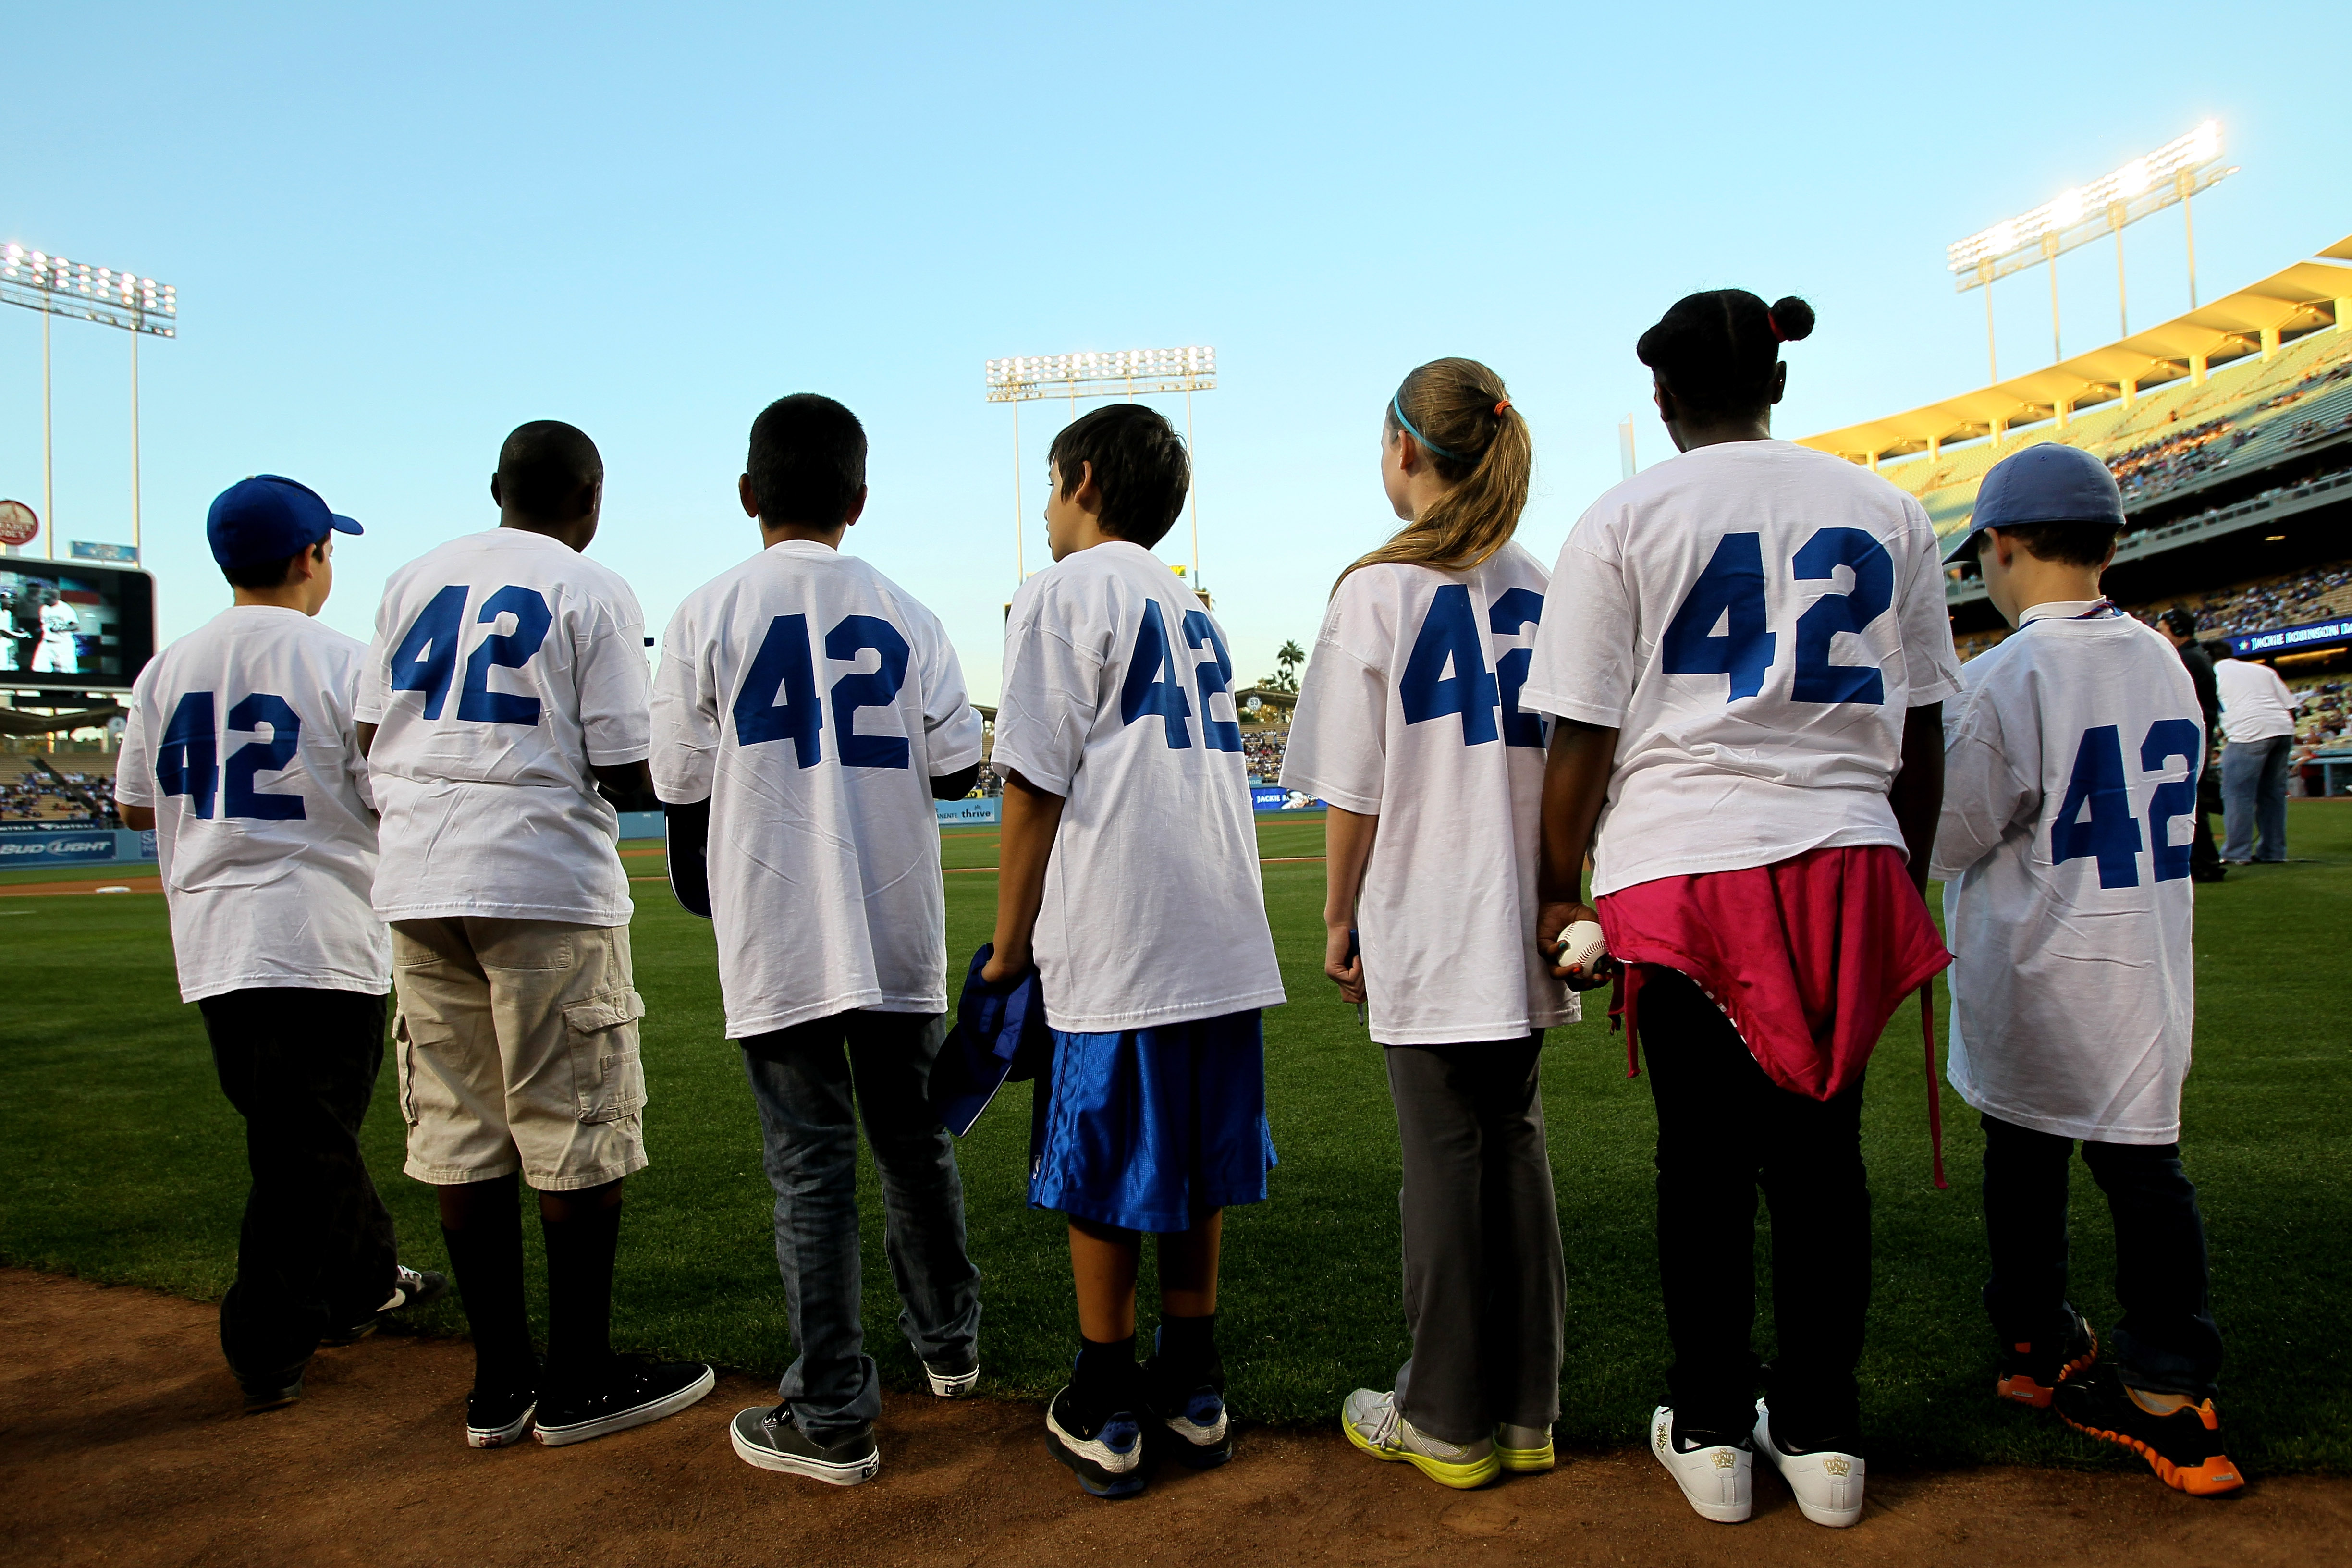 It's a huge privilege' to wear Jackie Robinson's No. 42